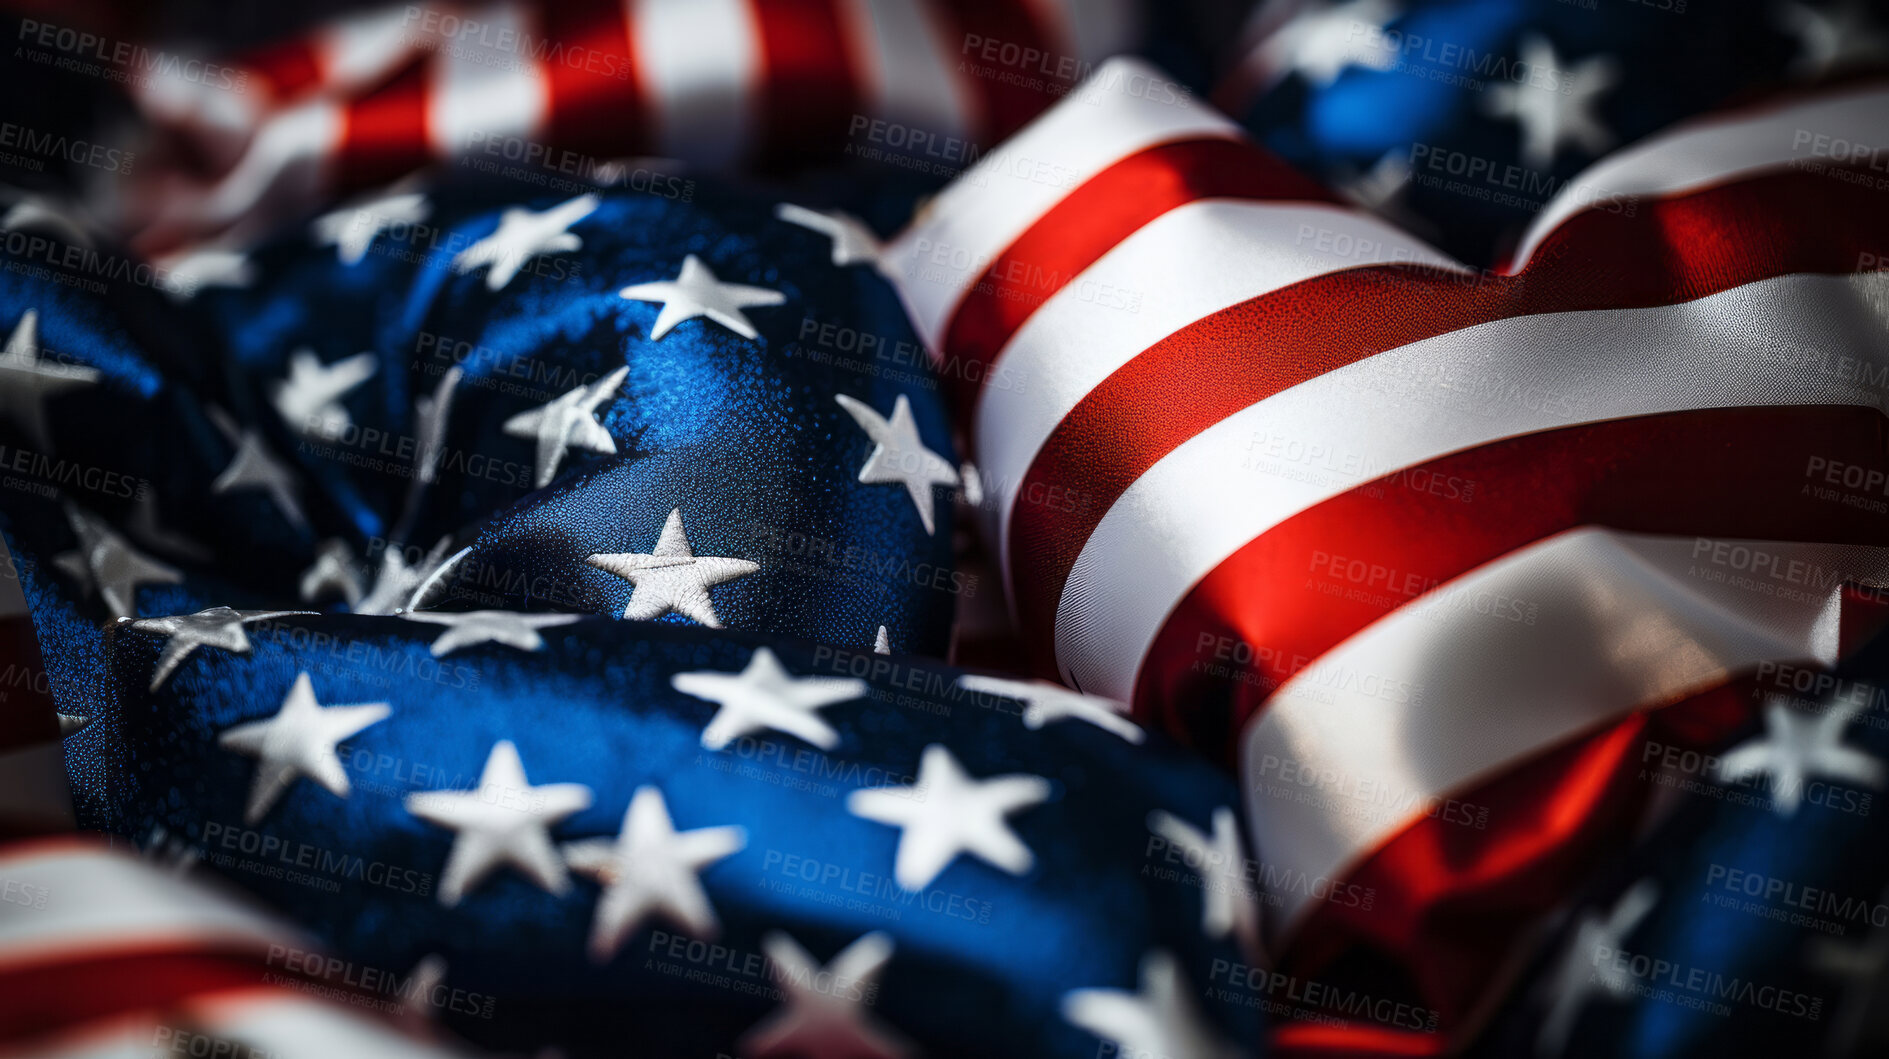 Buy stock photo Close-up folded American flag. Stars and stripes patriotic symbol. Red, blue and white pride.